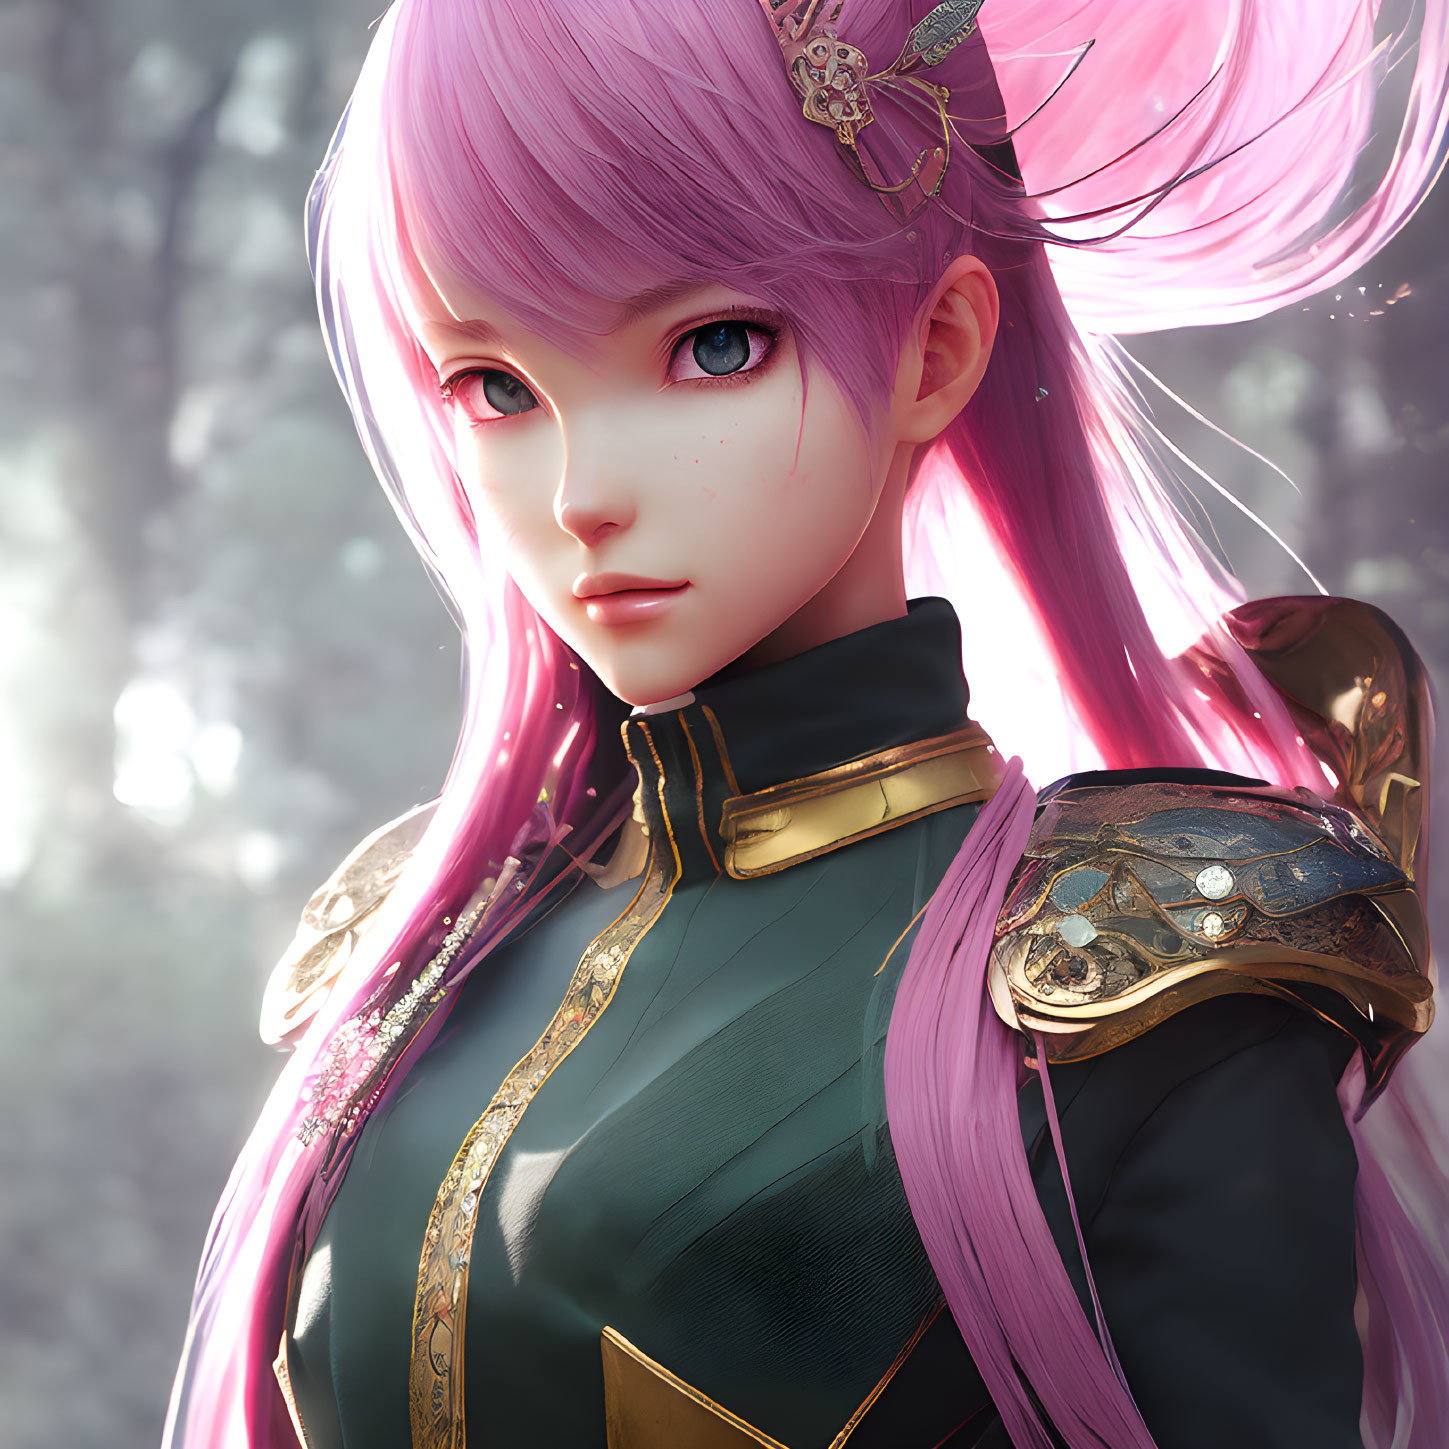 Fantasy-inspired digital art of female character with purple hair and embellished uniform